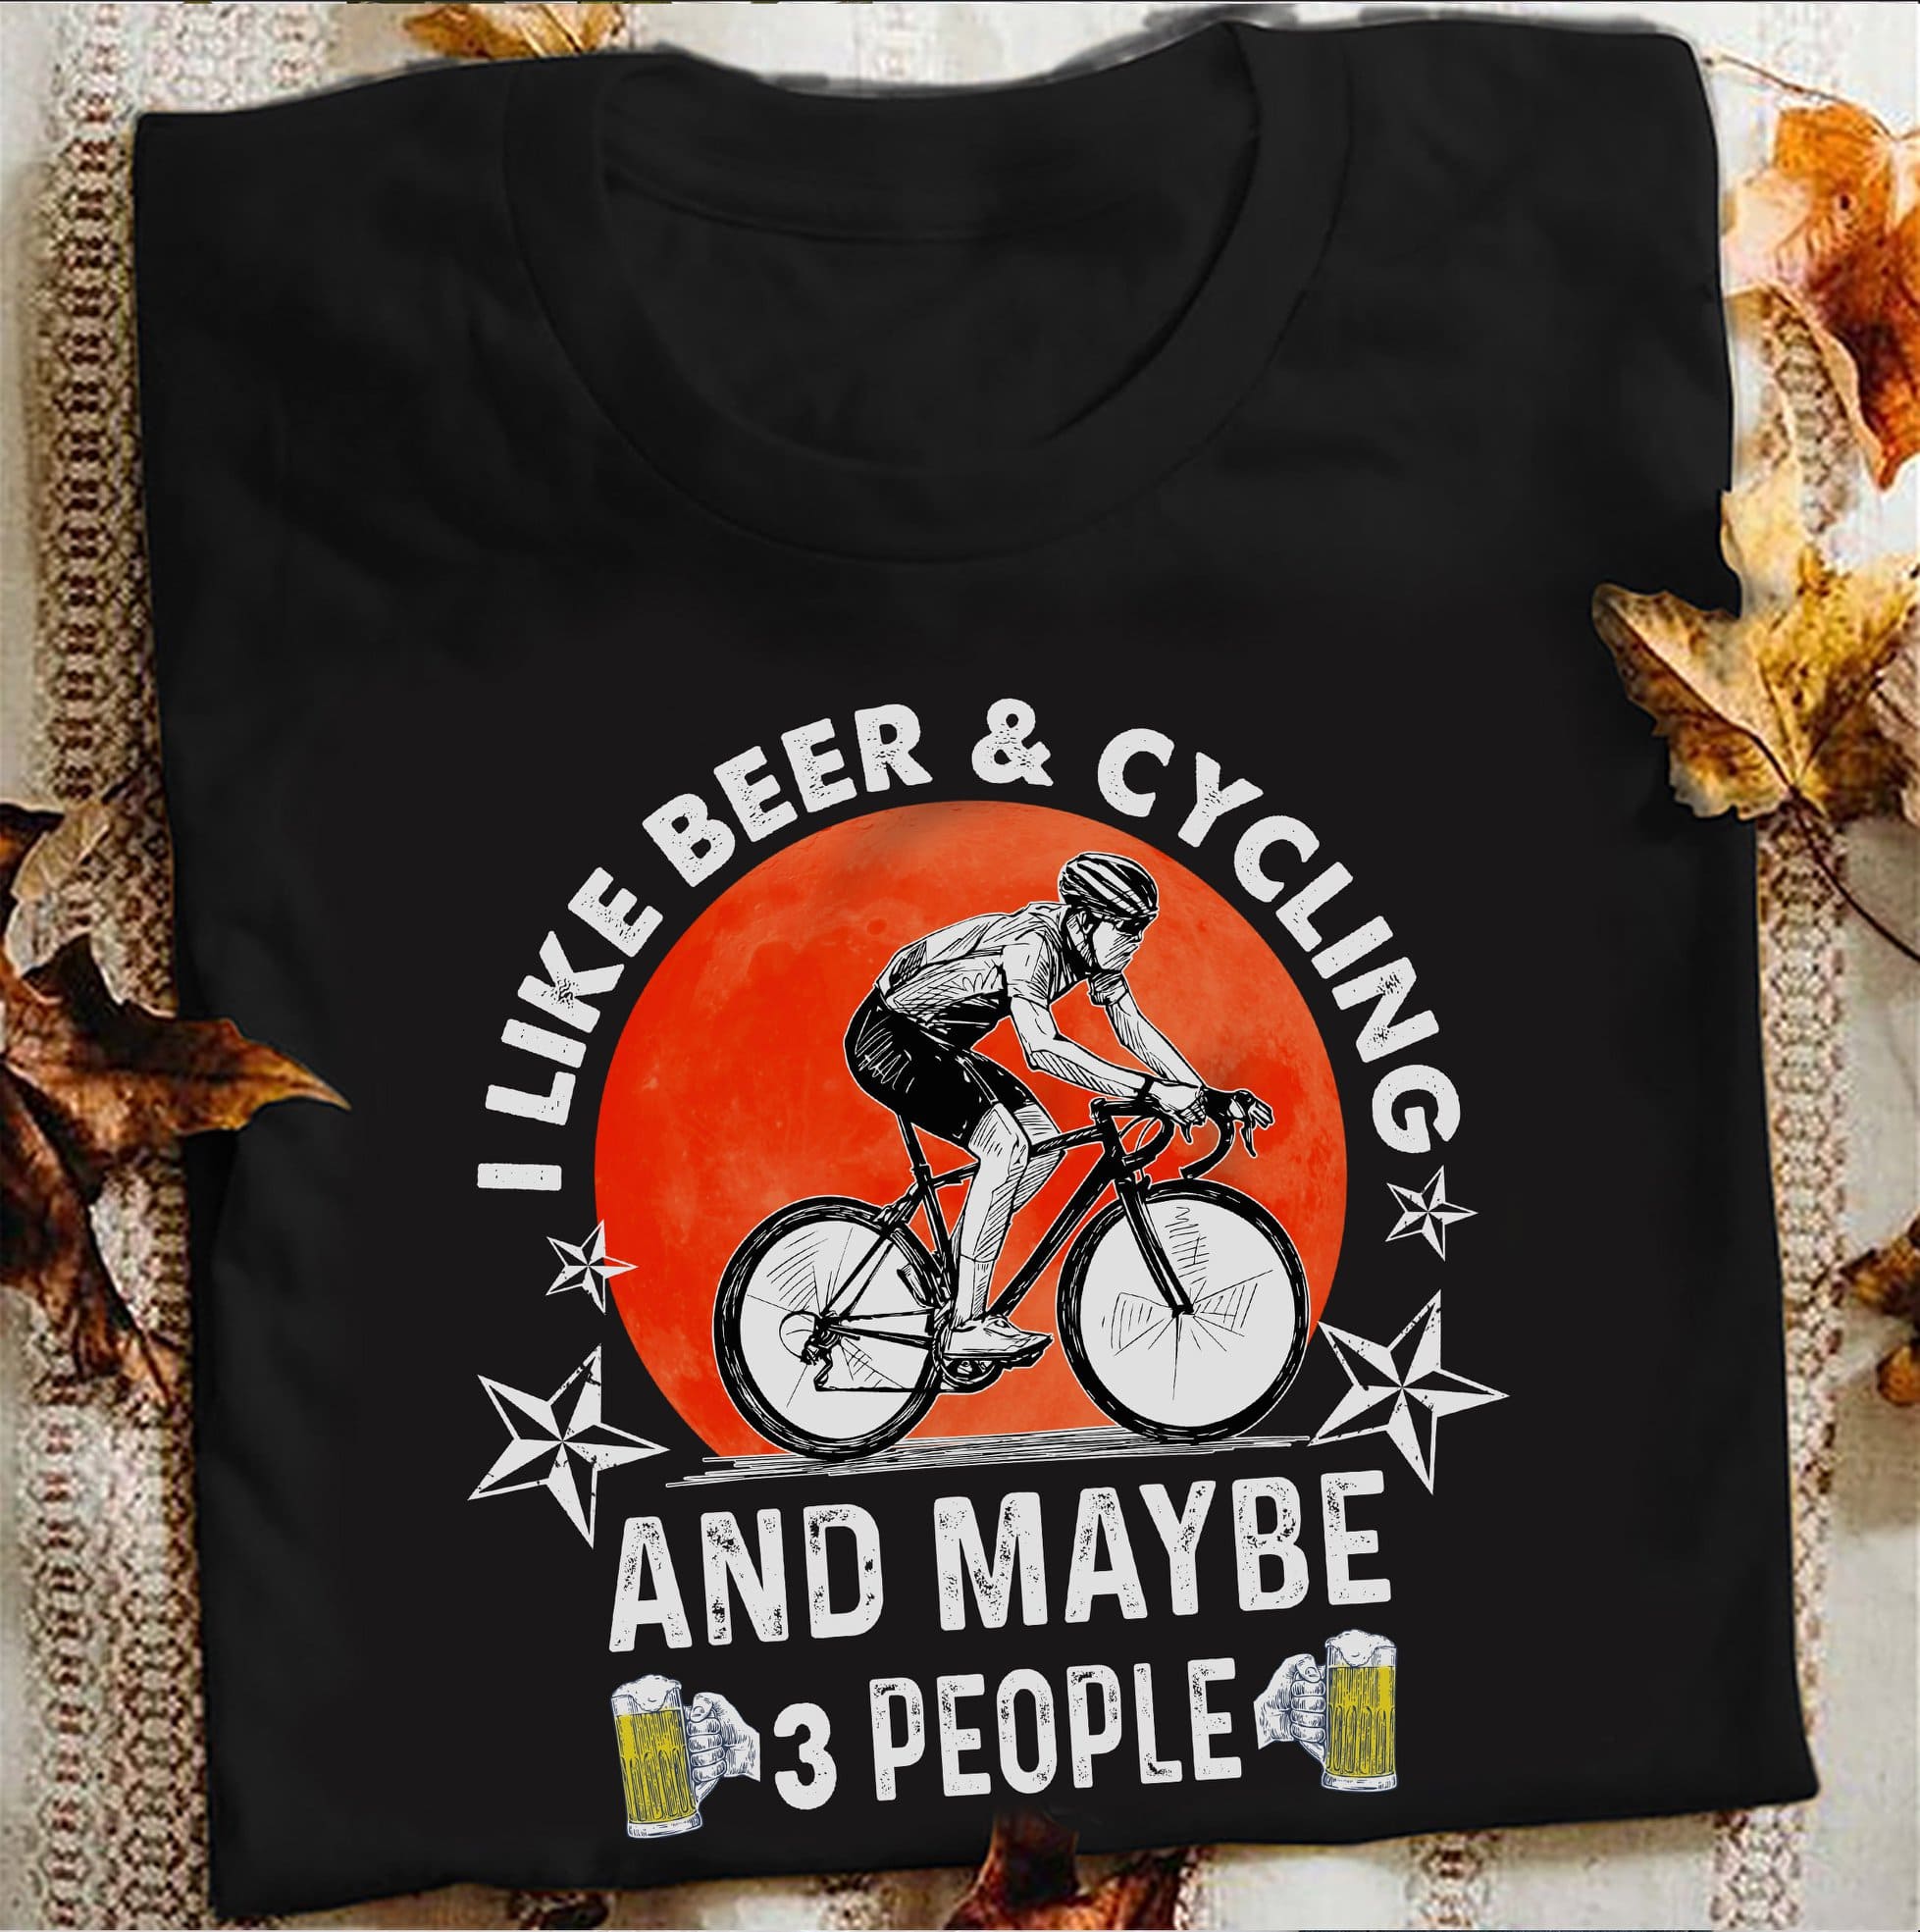 Beer Cycling - I like beer and cycling and may be 3 people